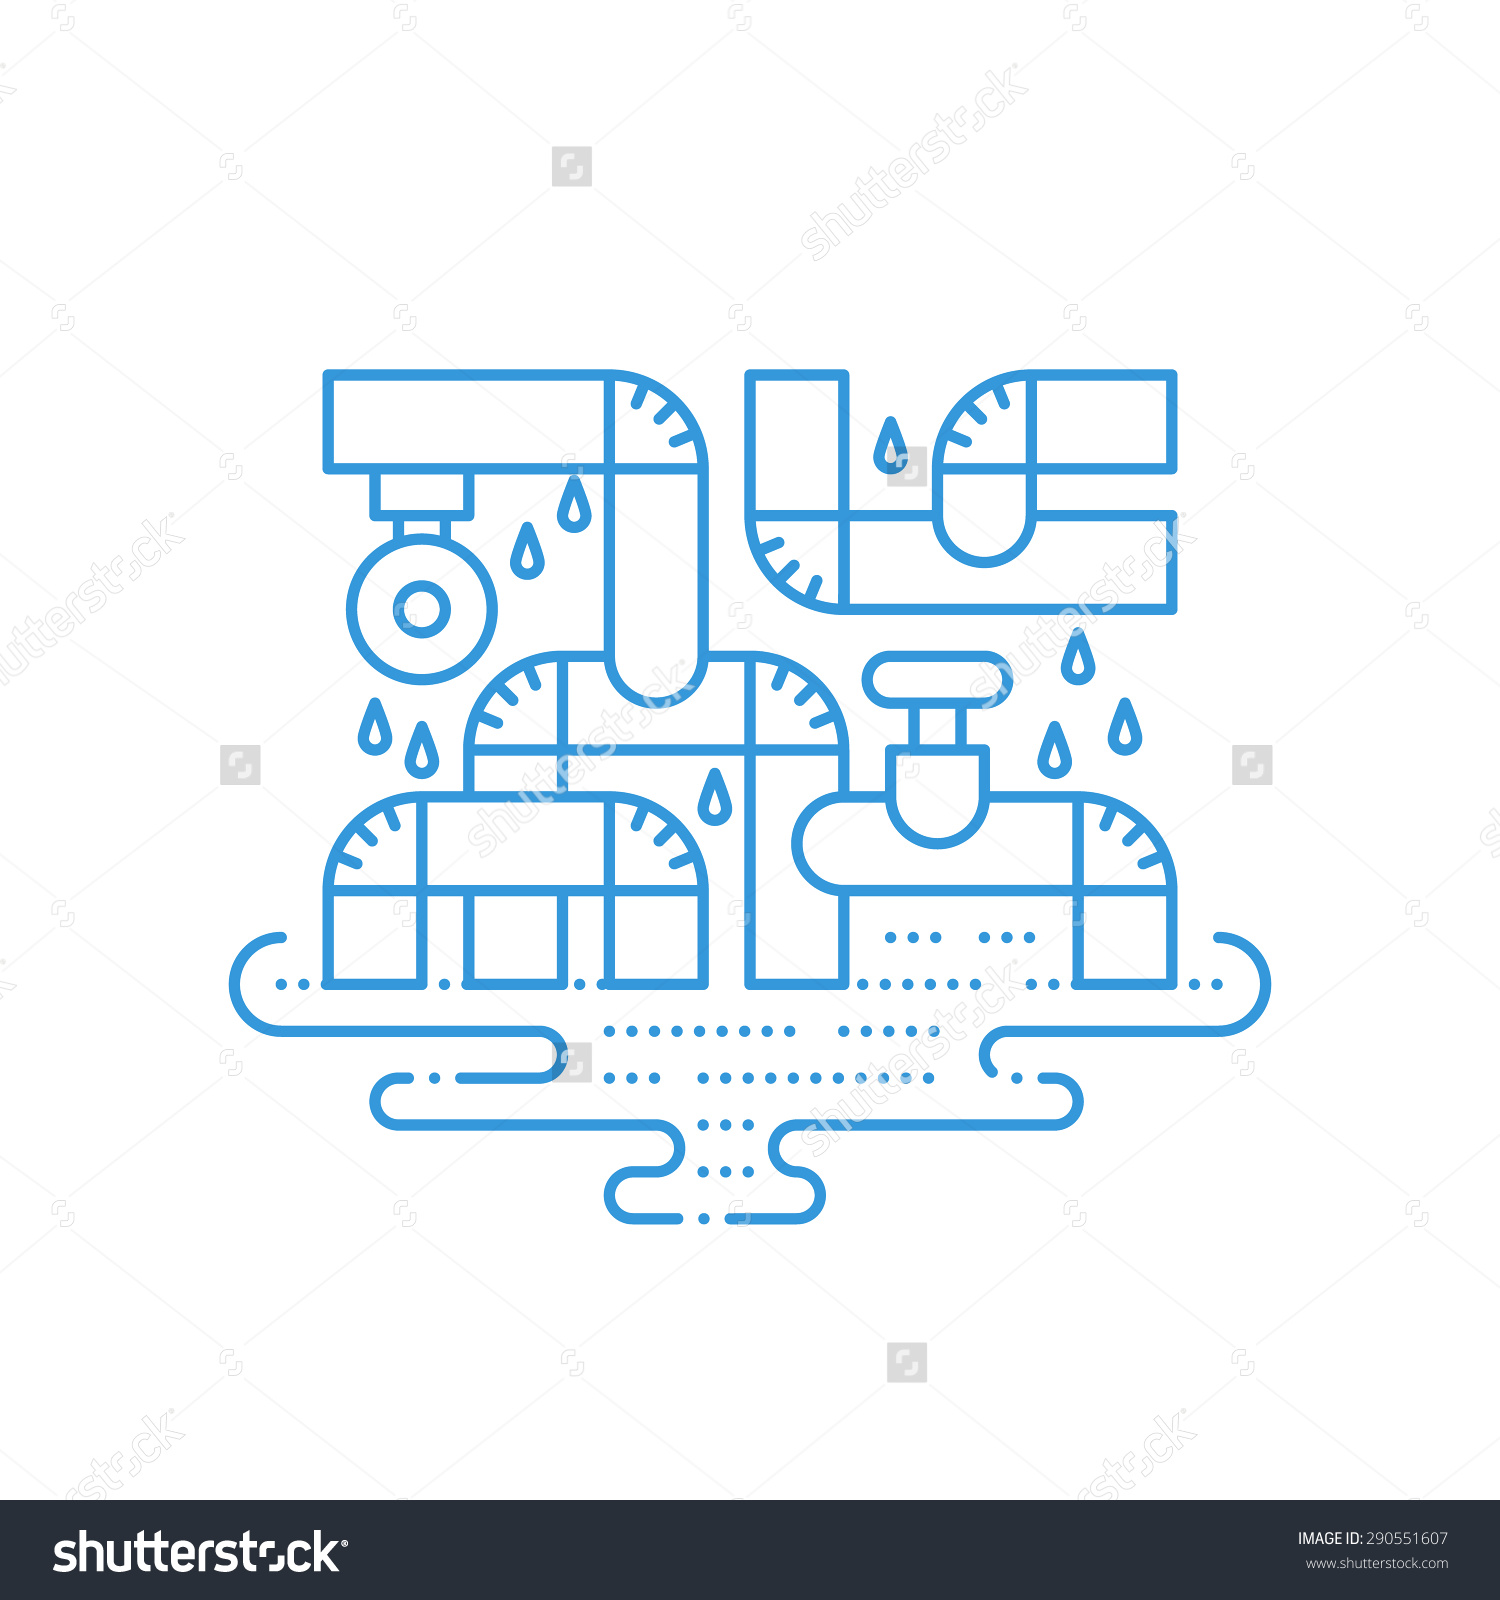 Bad Plumbing. Pipe Leakage. Canalization Problems. Stock Vector.